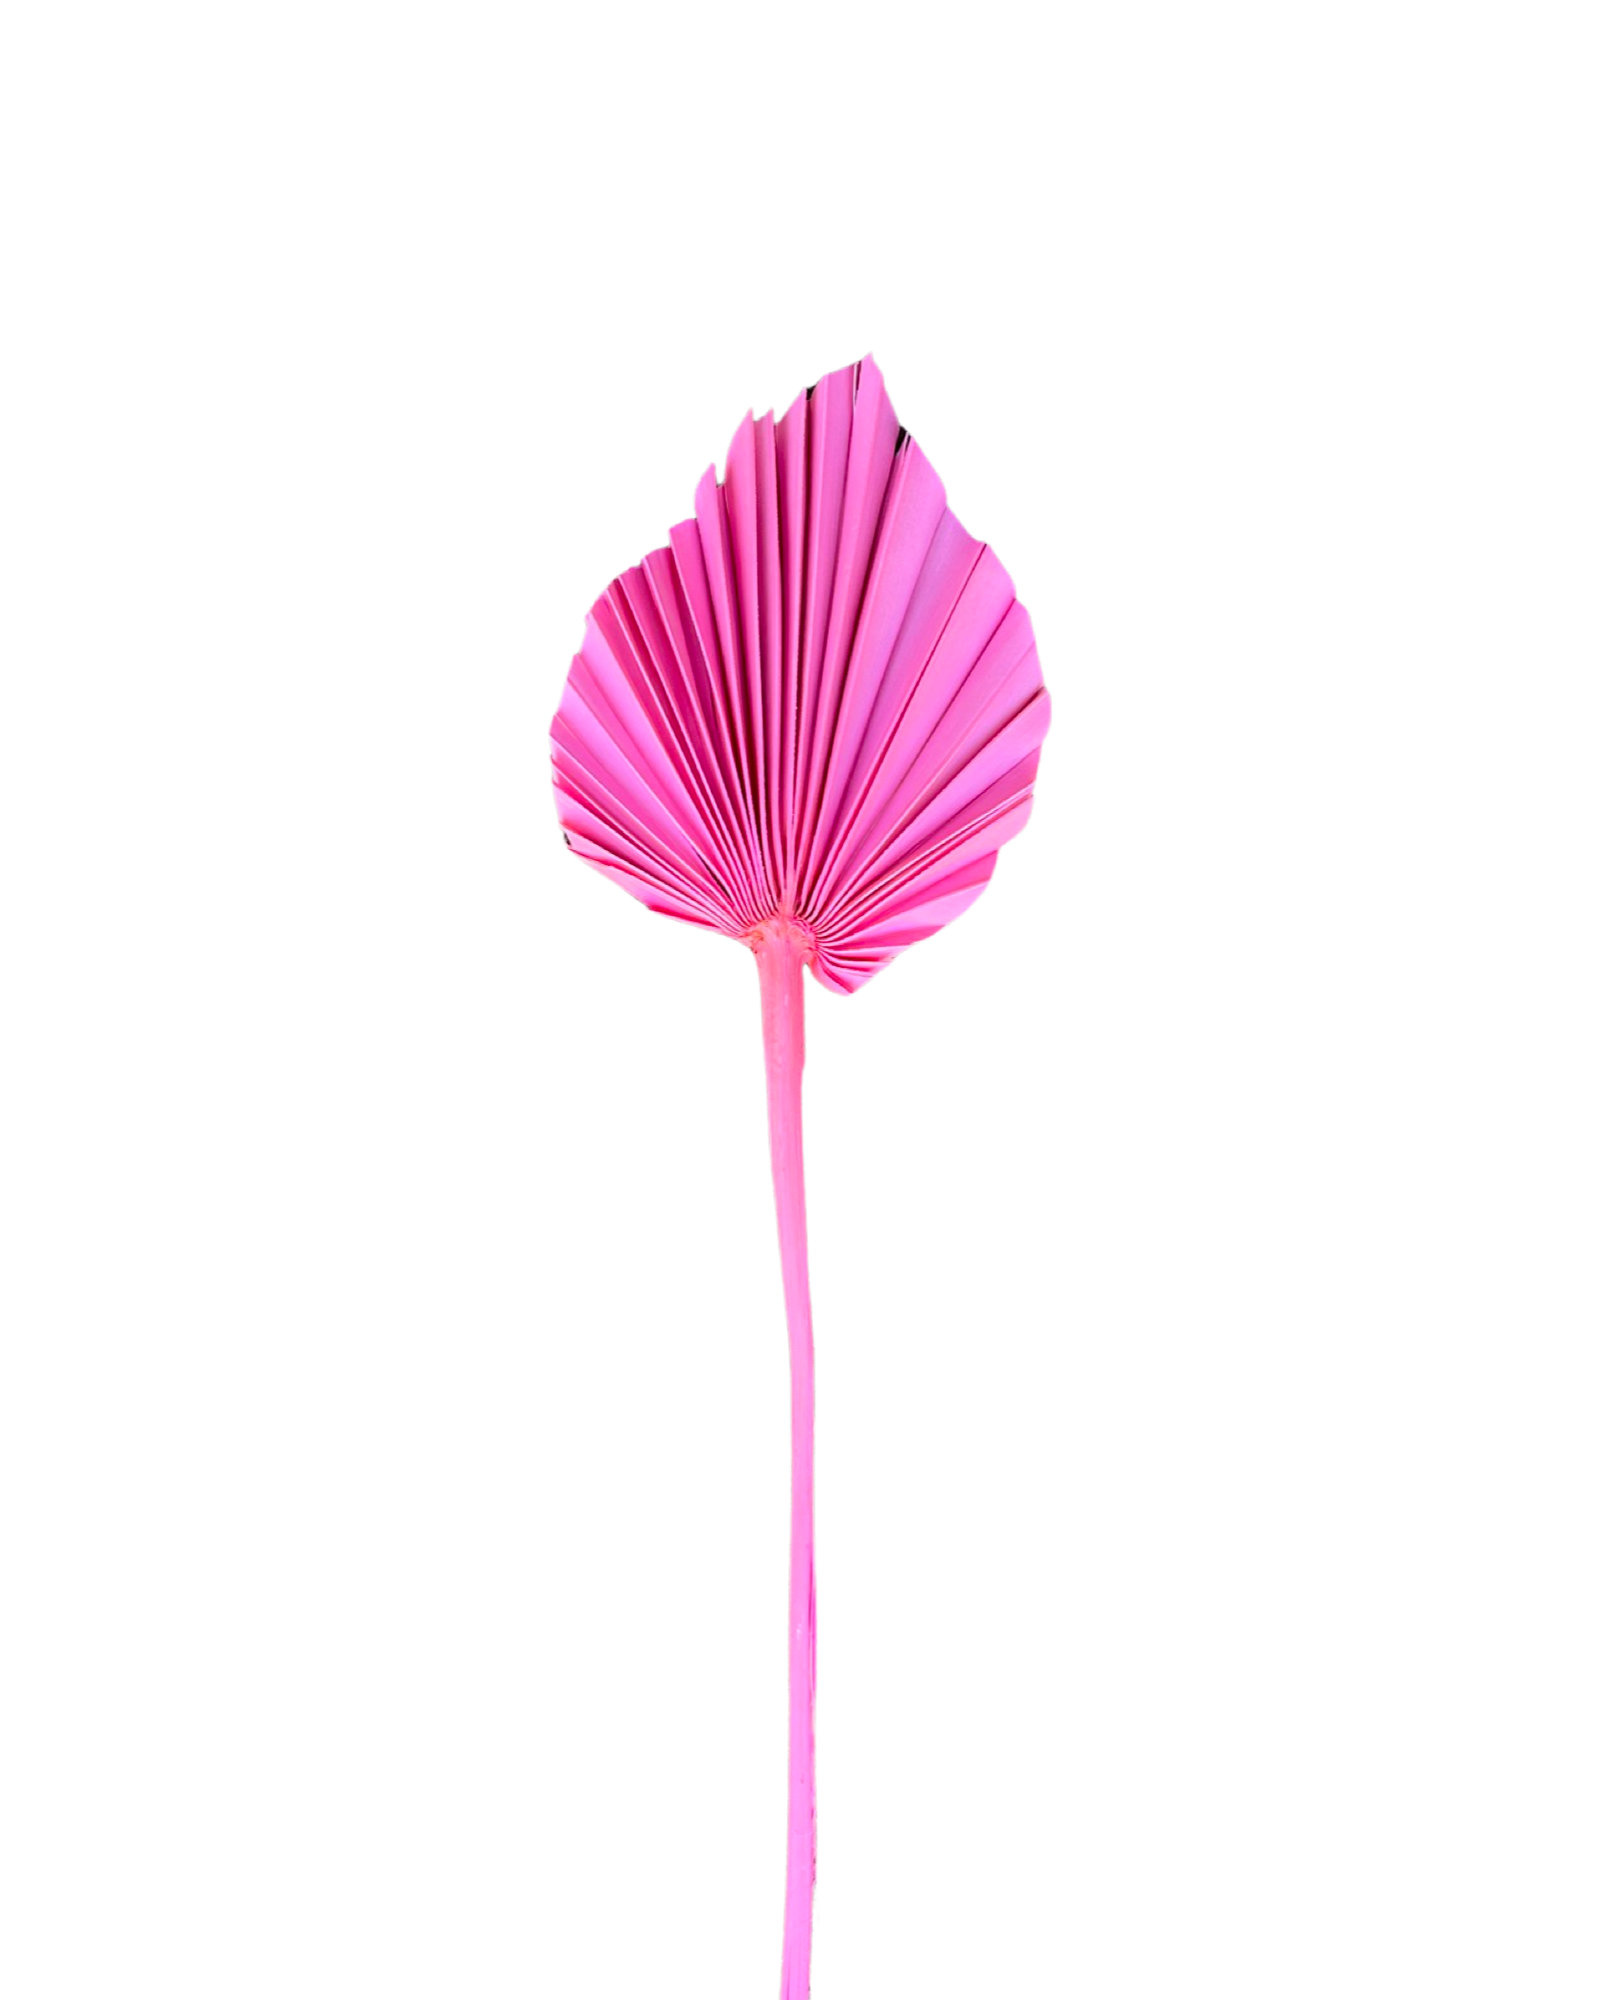 Spear palm small( ARECACEAE) - Pink